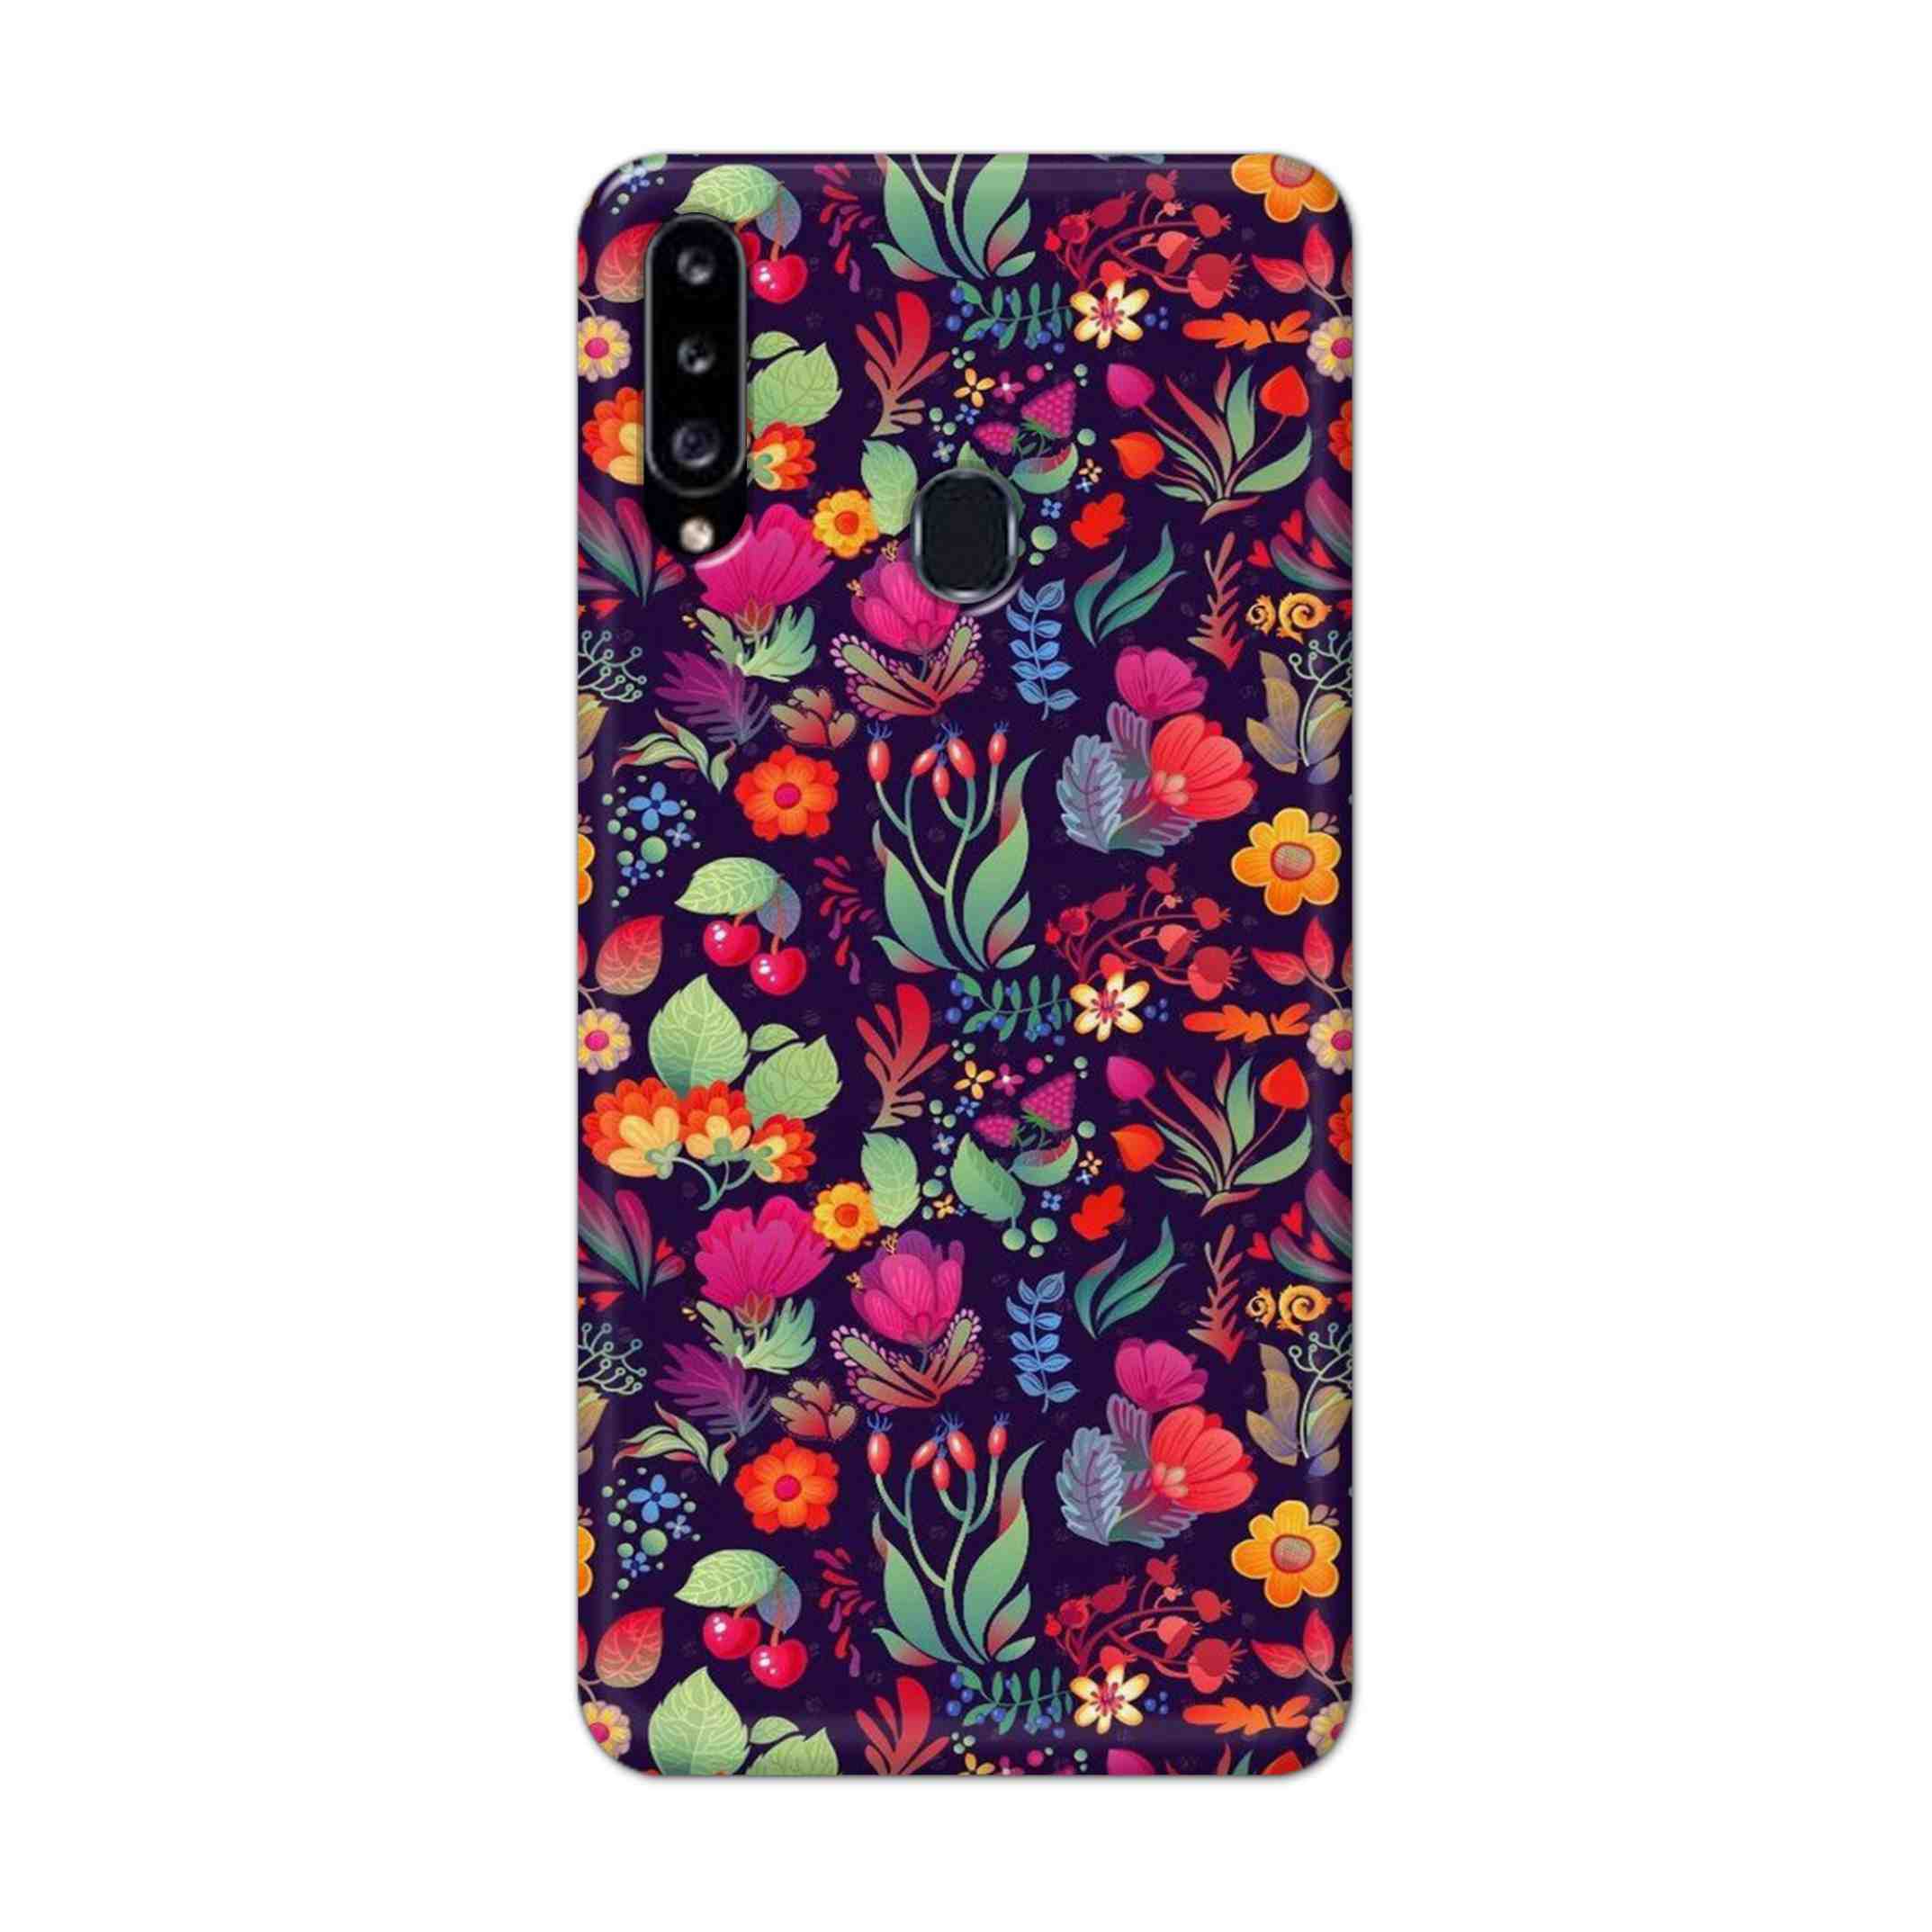 Buy Fruits Flower Hard Back Mobile Phone Case Cover For Samsung Galaxy A21 Online